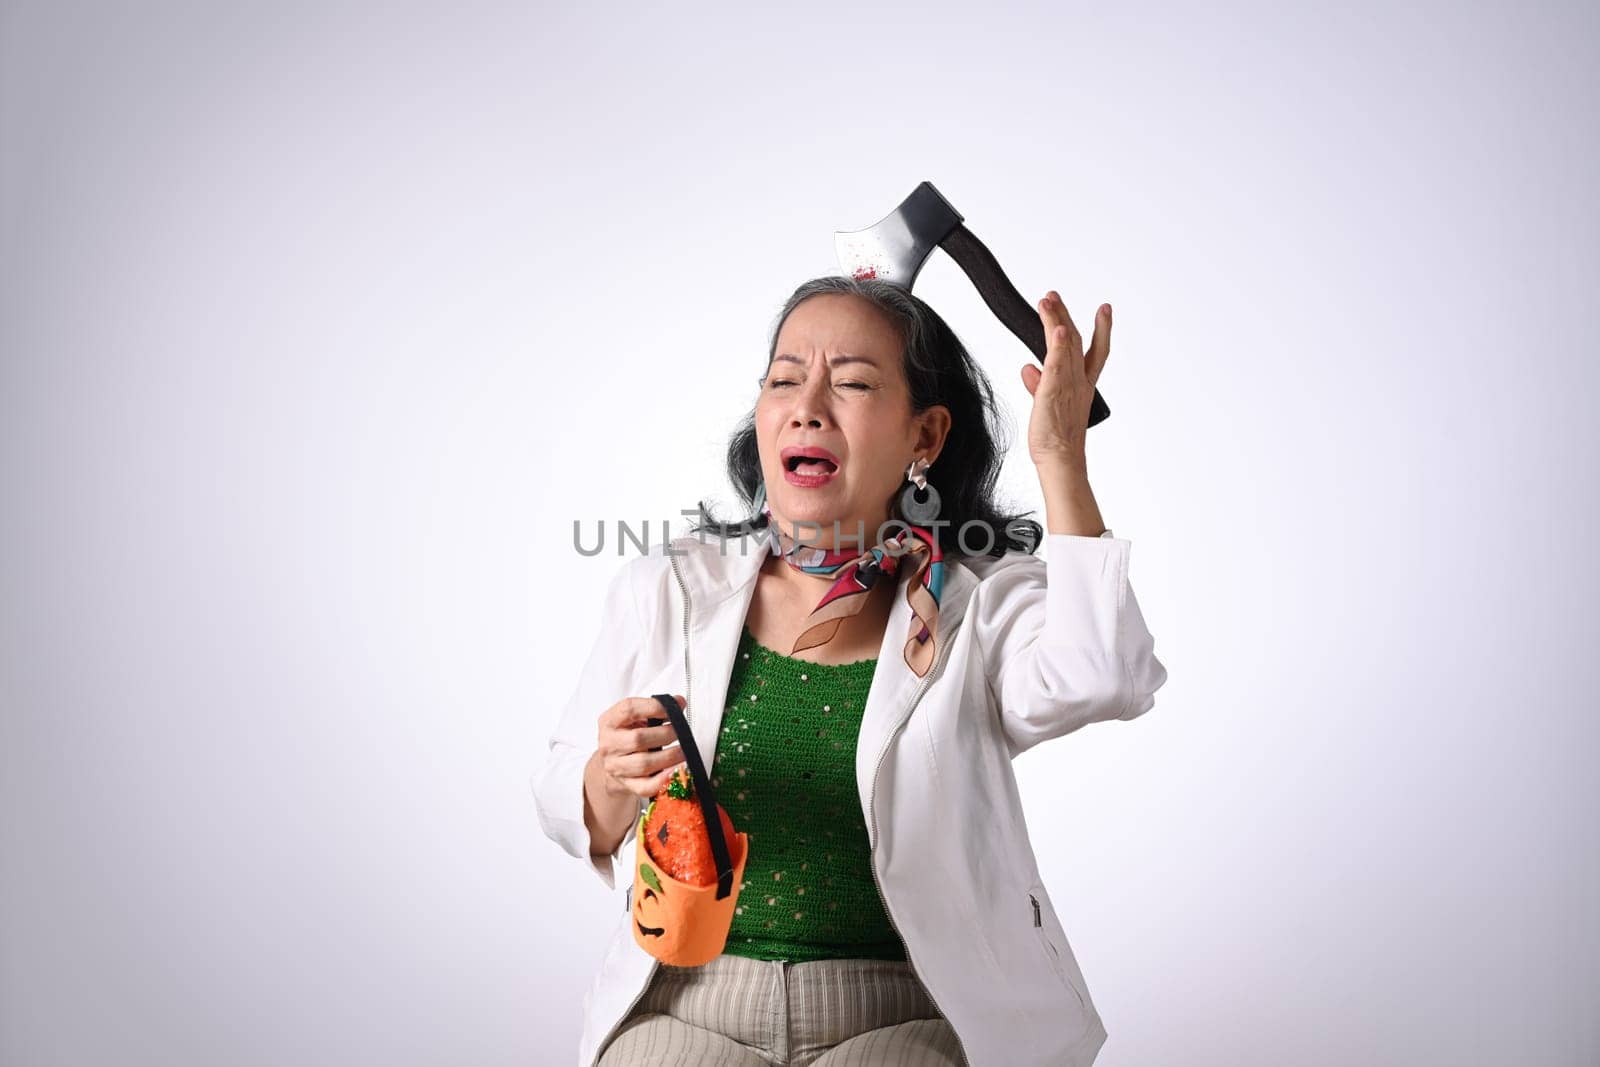 Playful senior woman dressed in halloween costume holding a pumpkin on white background.